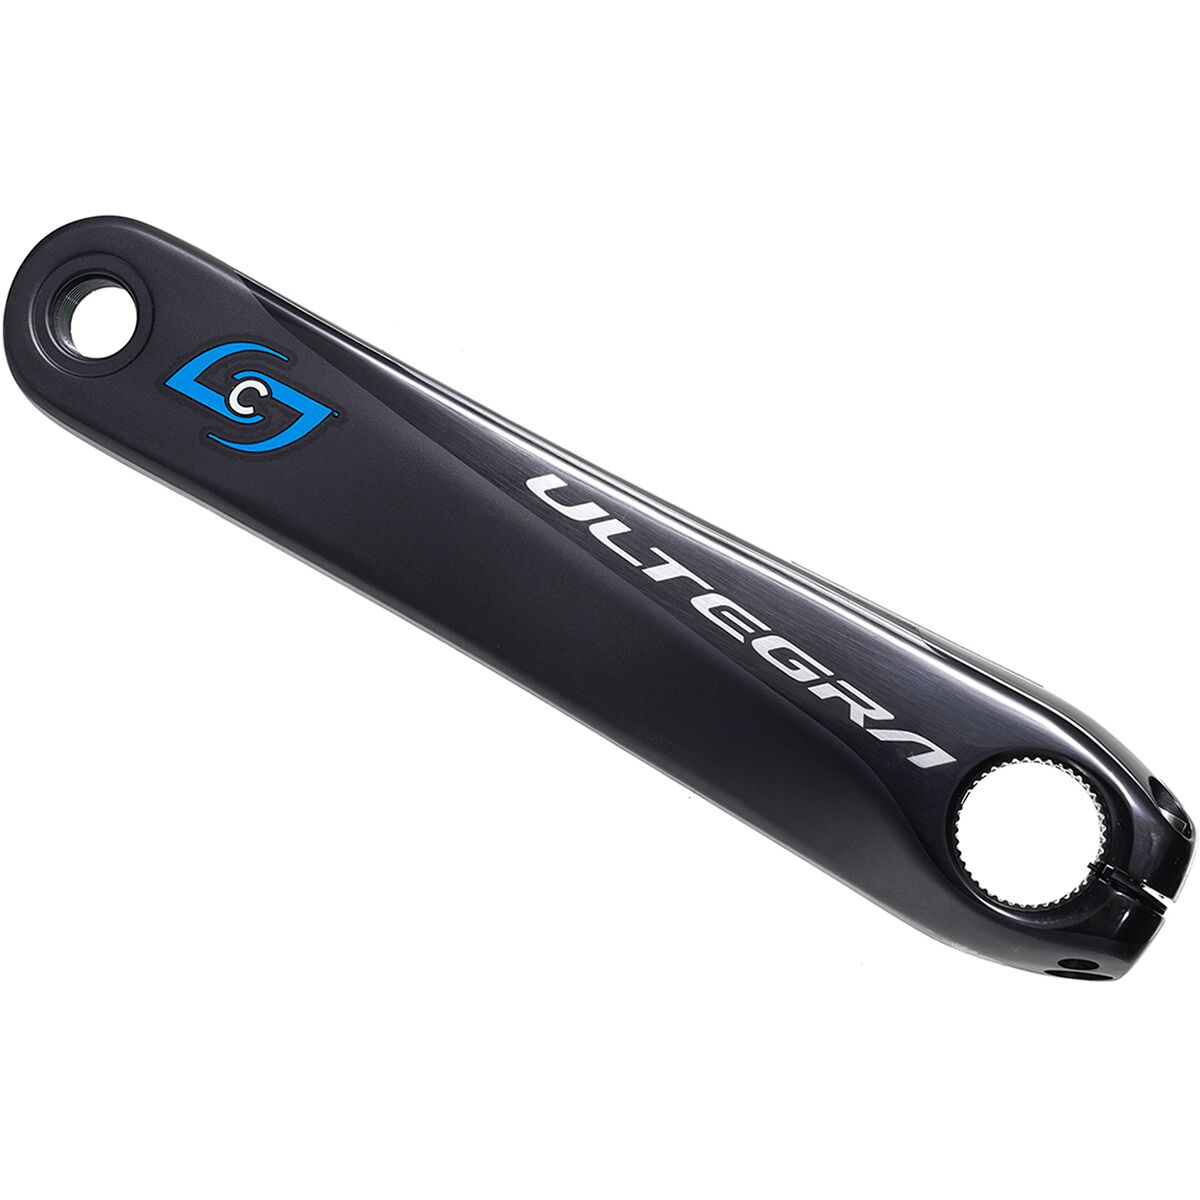 Pedal vs Crank Based Cycling Power Meters